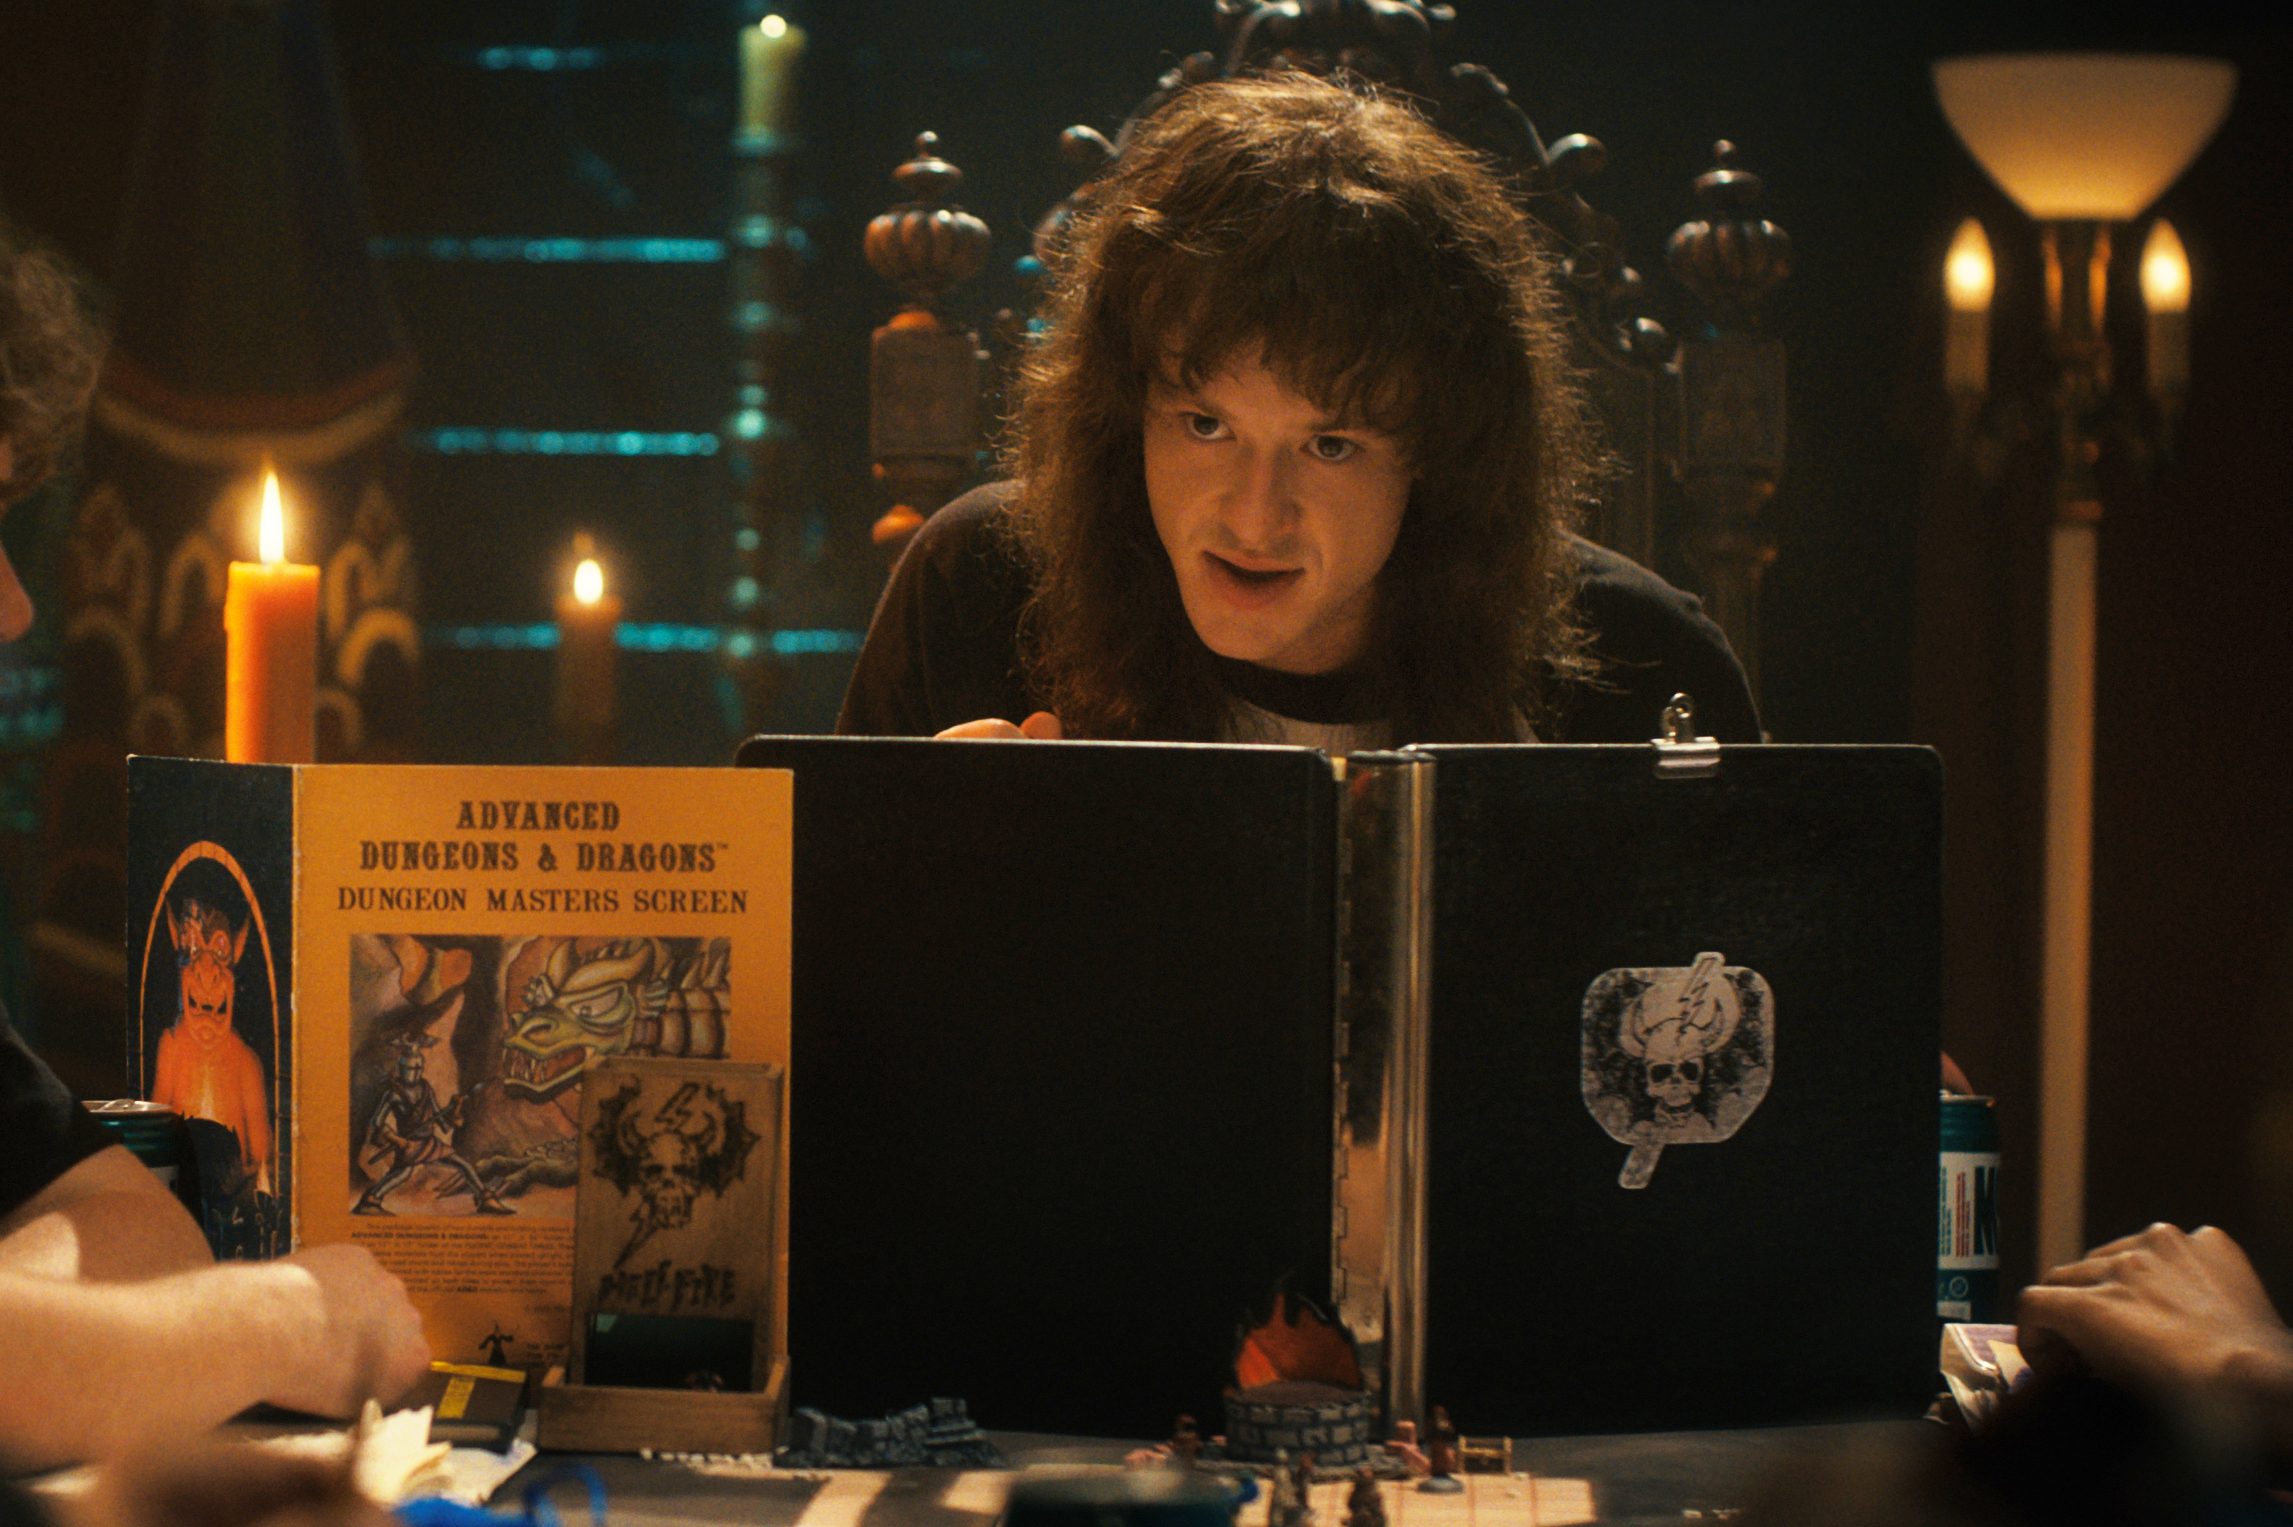 Stranger Things season 4 was inspired by real Dungeons & Dragons panic